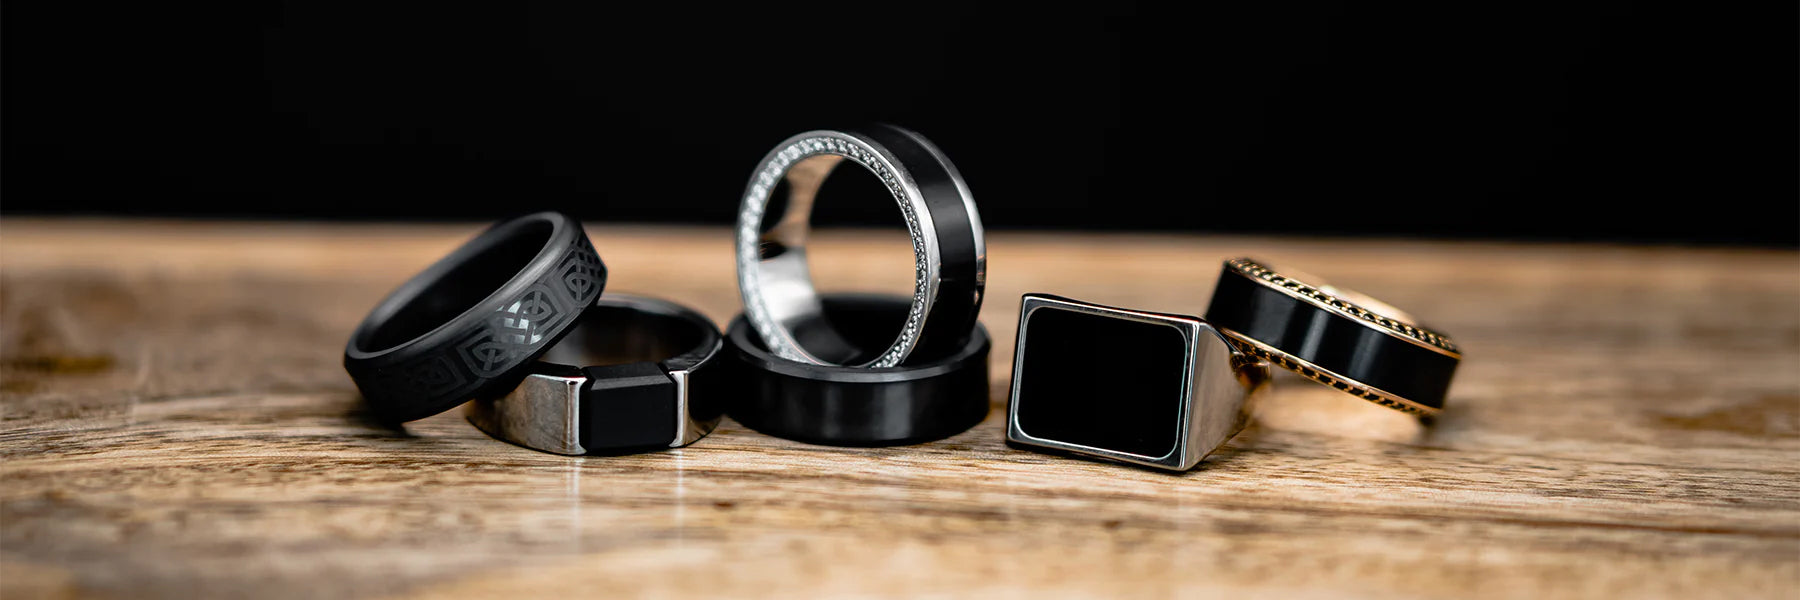 Six Different Black Diamond Rings on Wood Surface | Display of Black Diamond Wedding Rings with Yellow Gold, Silver, & White Gold | All Elysium Black Diamond Rings | Collections